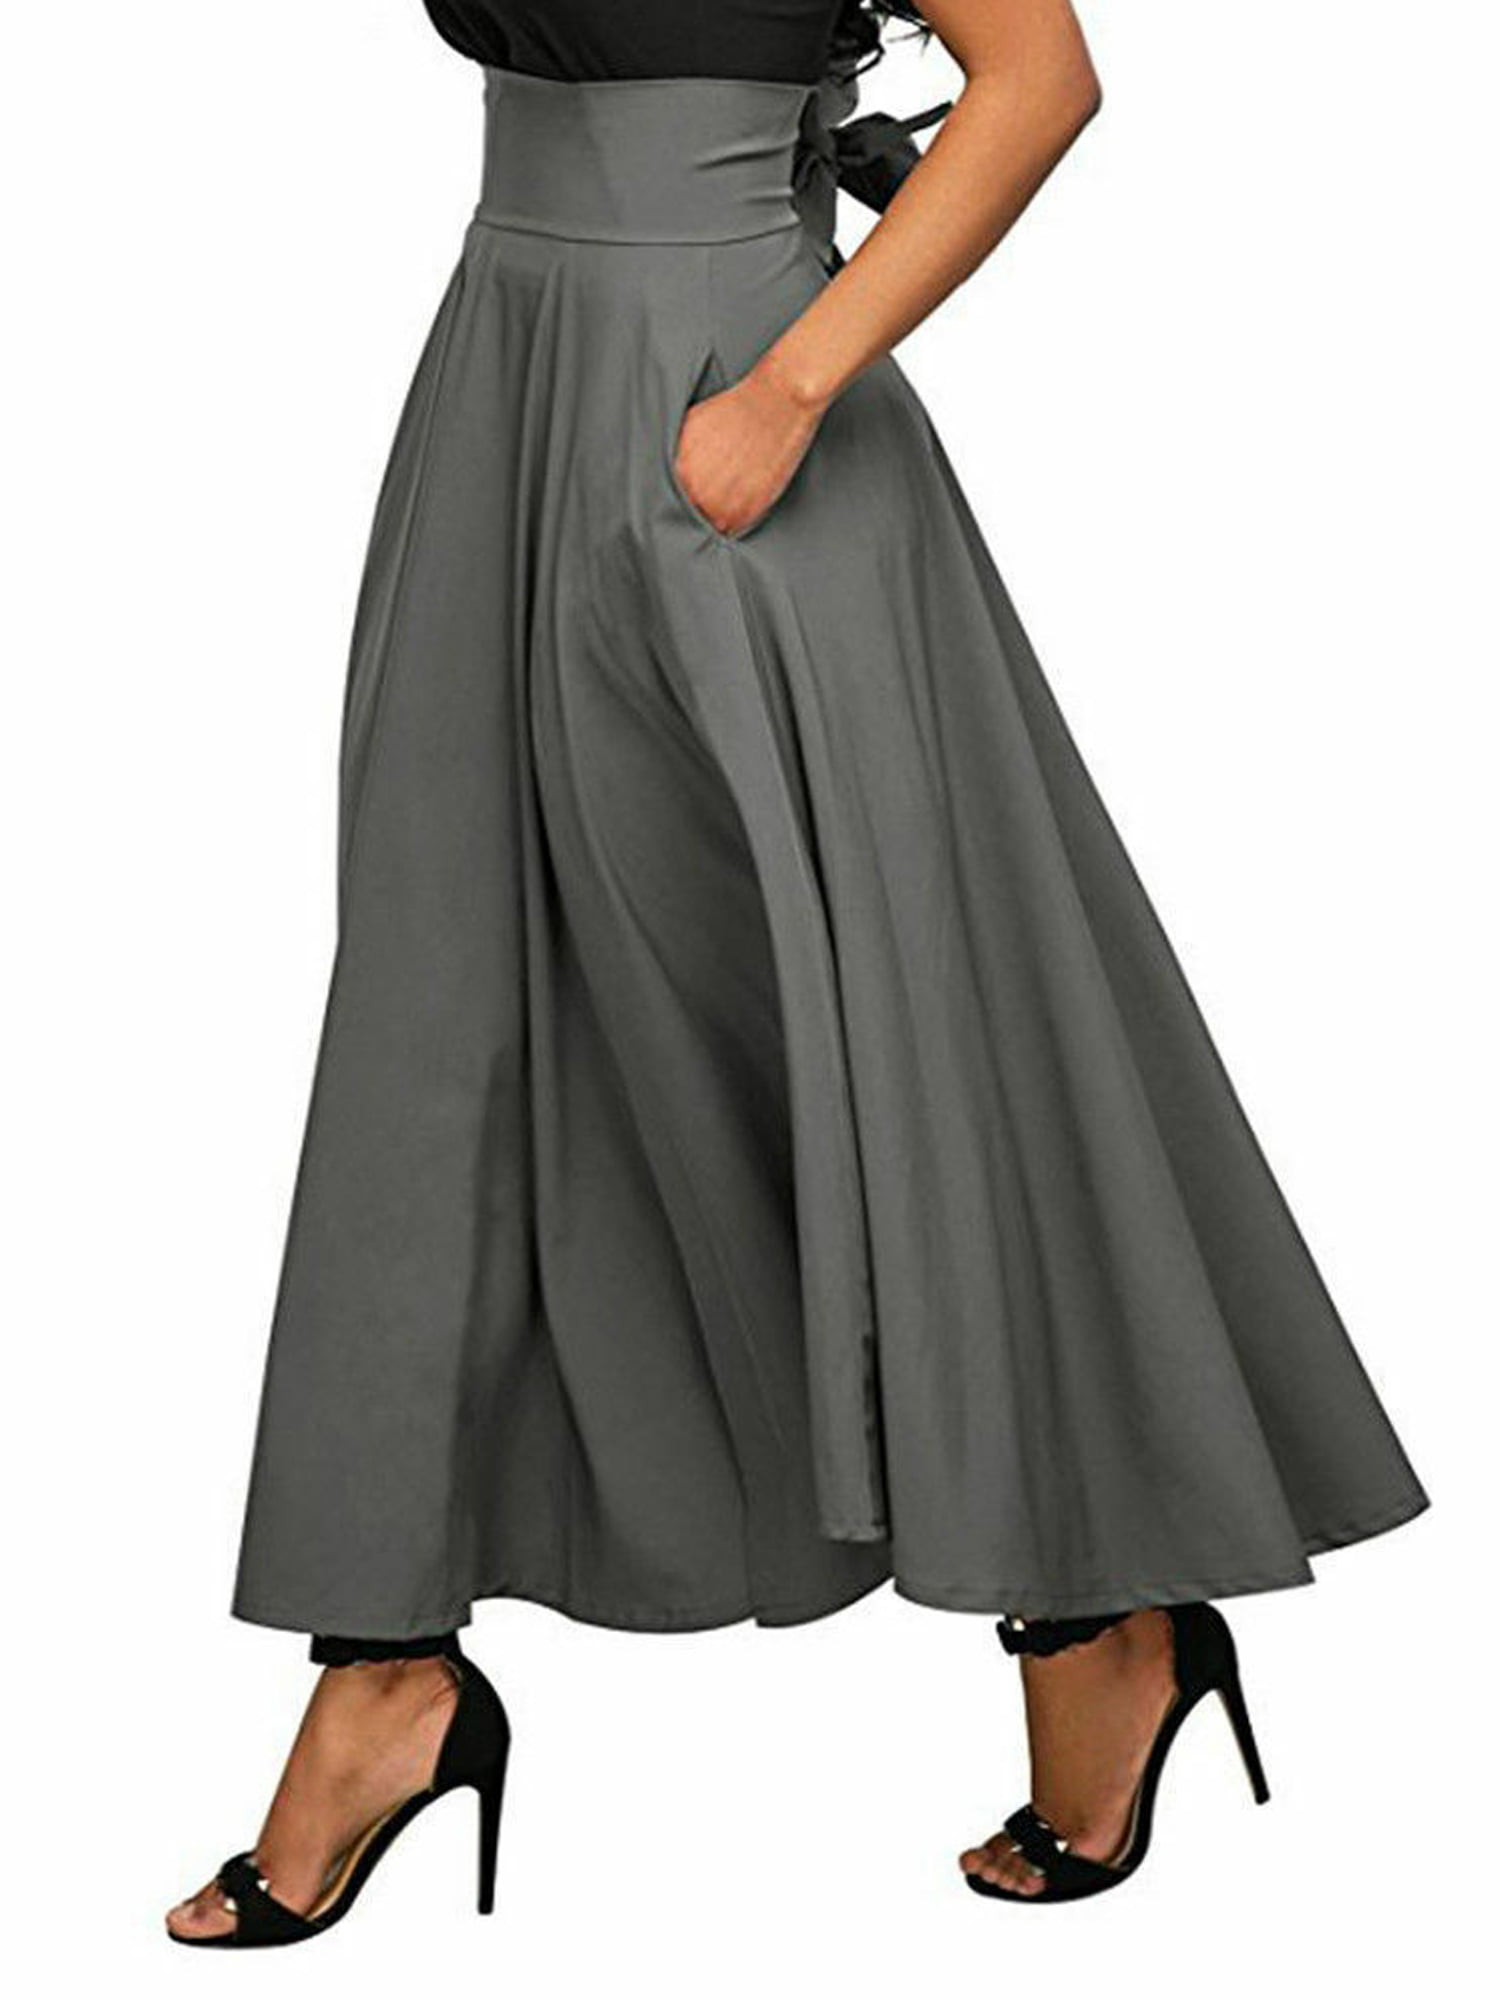 X-Large Dark Blue Womens Basic Ultra Soft Lightweight Denim Fit and Flare A-Line Ankle Length Maxi Skirt